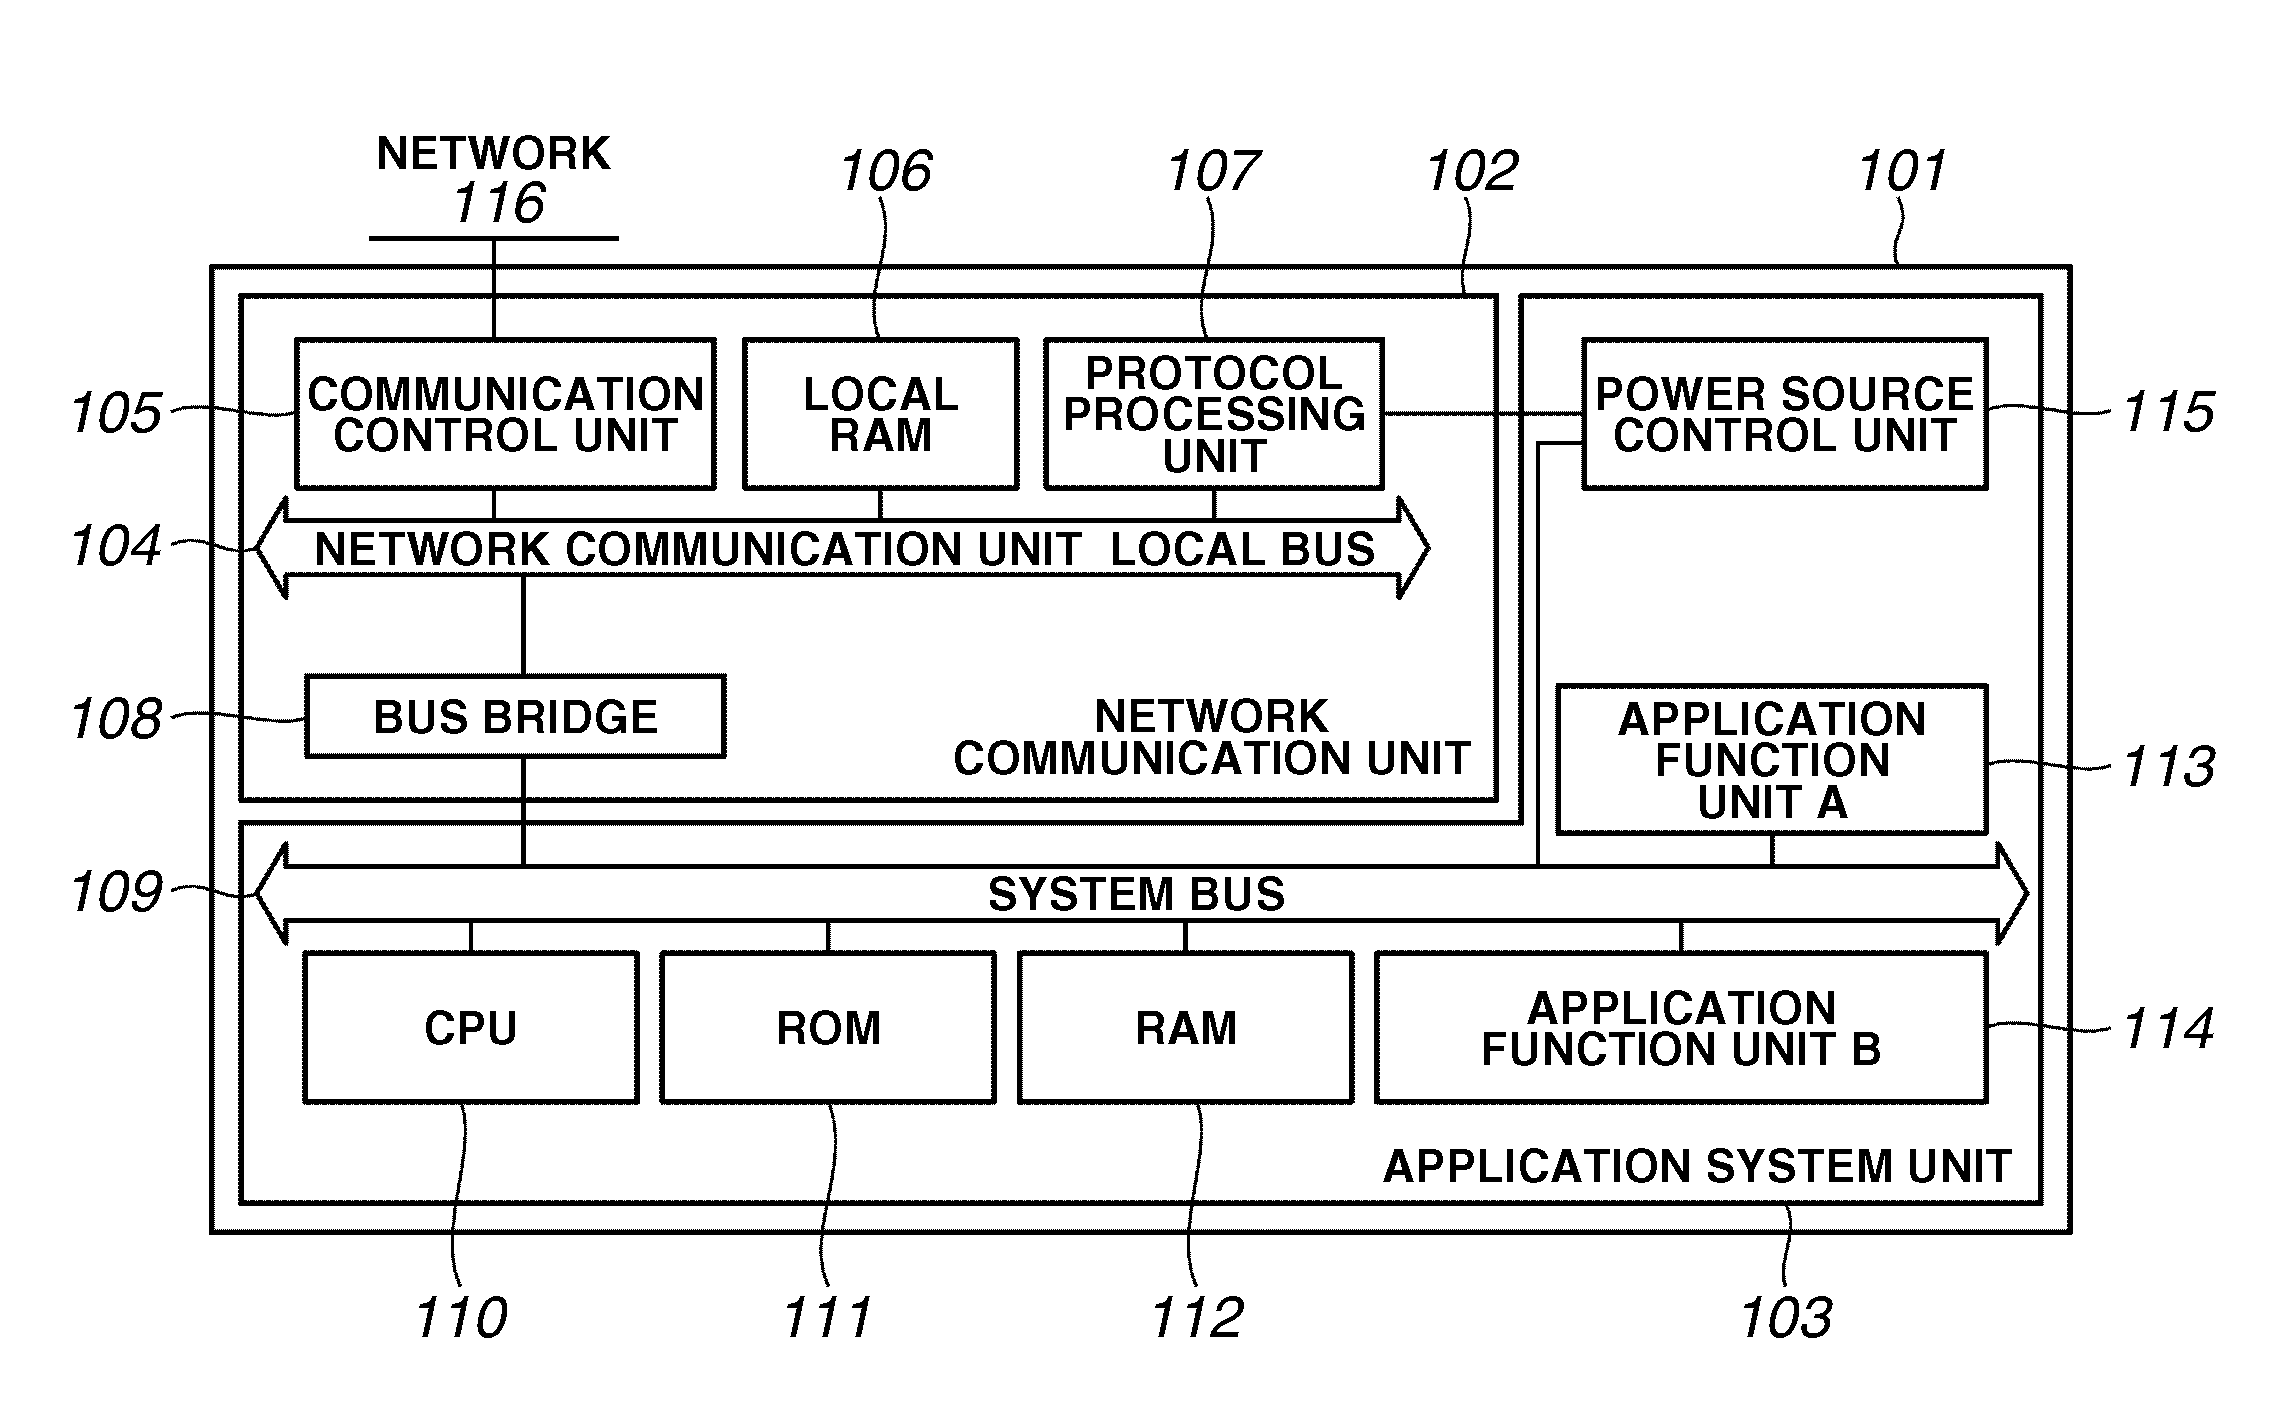 Information processing apparatus having a low power consumption state and releasing the low power consumption state to perform communication, and power control method therefor